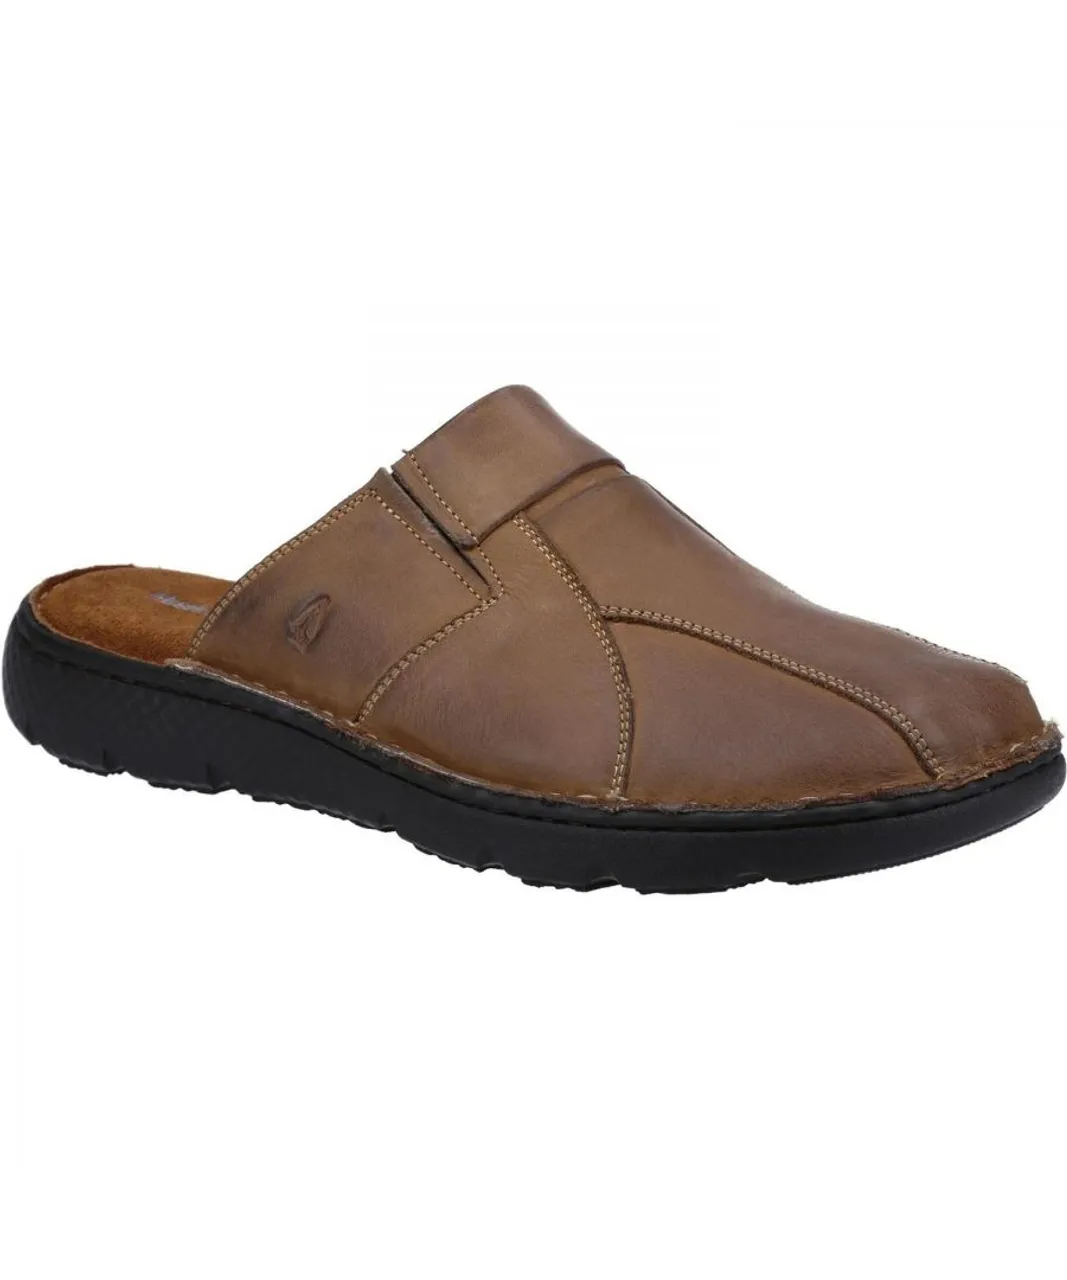 Hush Puppies Carson Mule Leather Sandal Mens - Brown